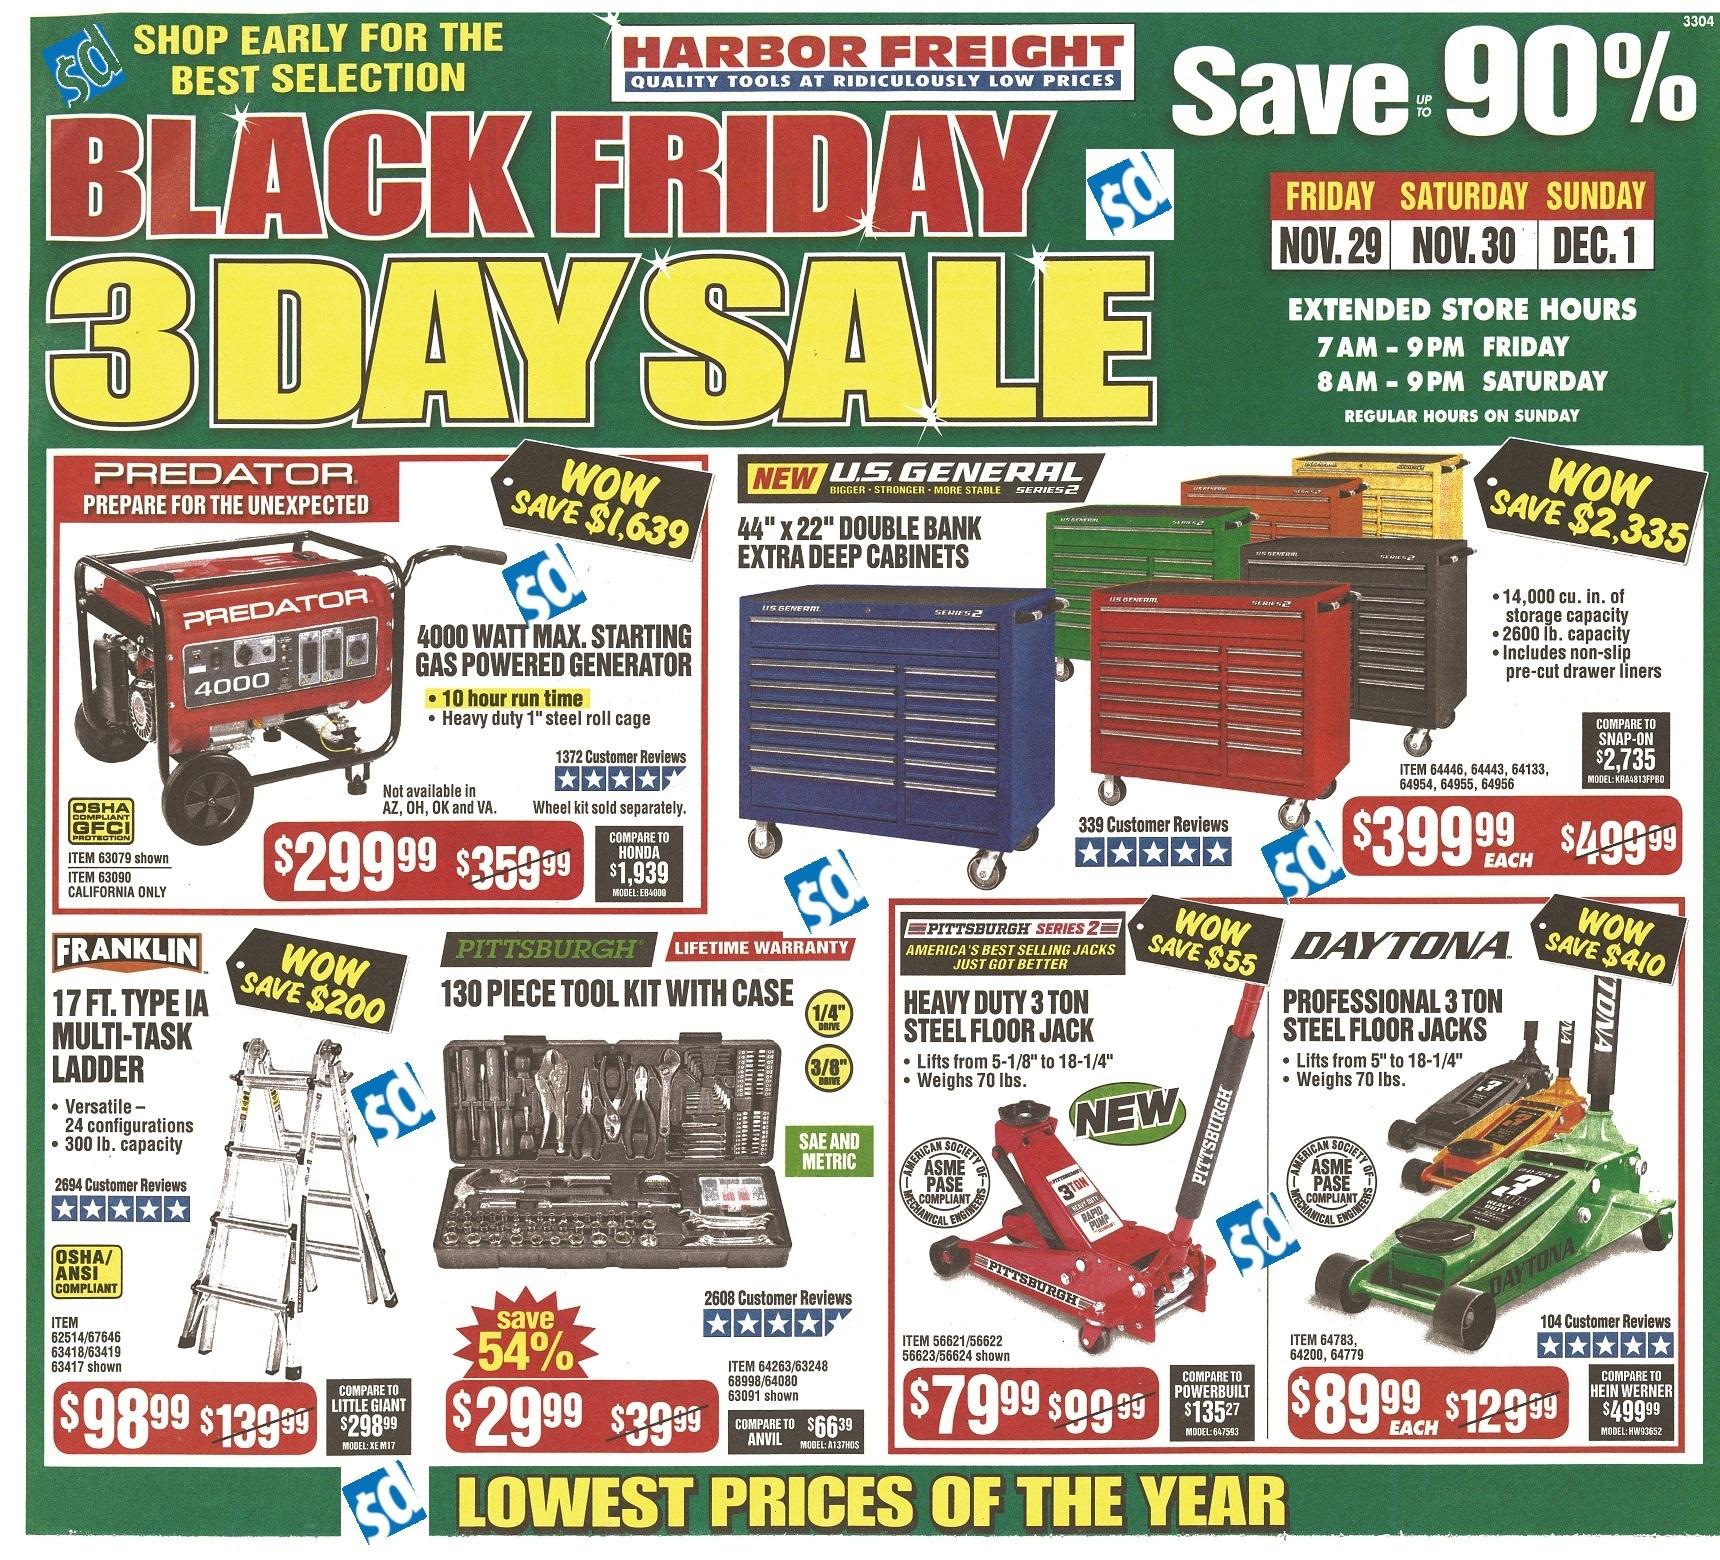 Harbor Freight Tools Black Friday Ad 2019 - Sale Live Now - What Stores Have Black Friday Sales All Weekend